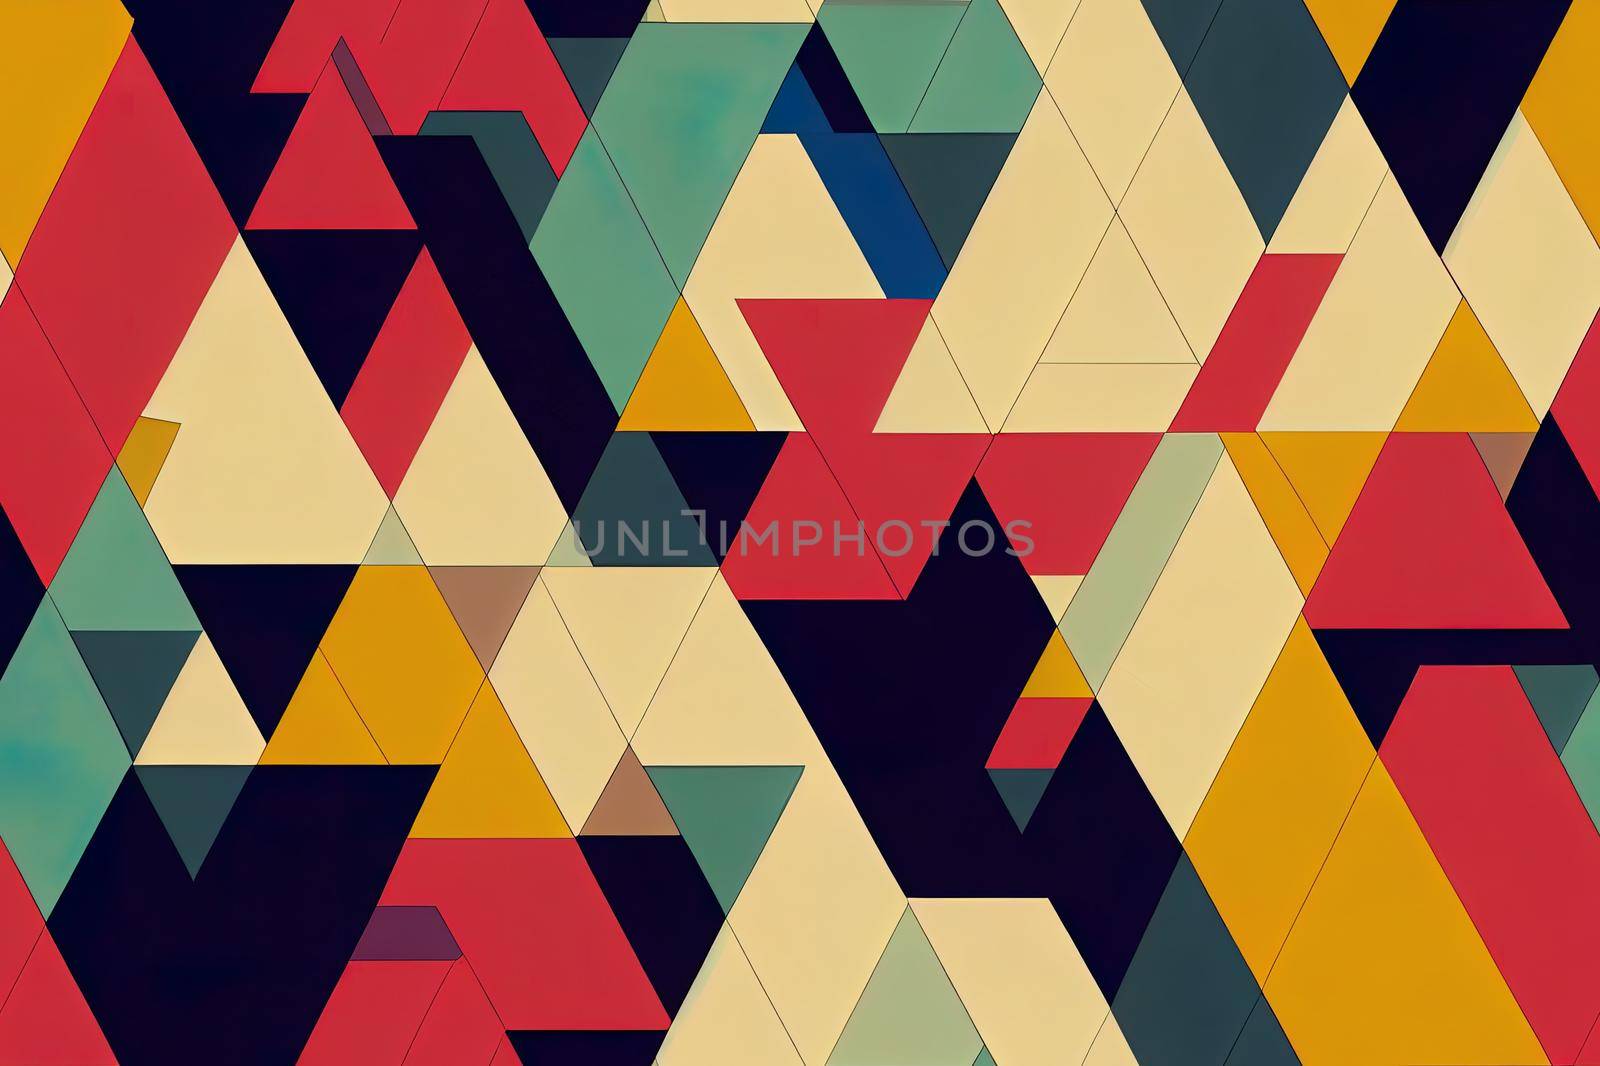 Seamless abstract 2d pattern - repeat geometric triangle mosaic High quality 2d illustration. by 2ragon